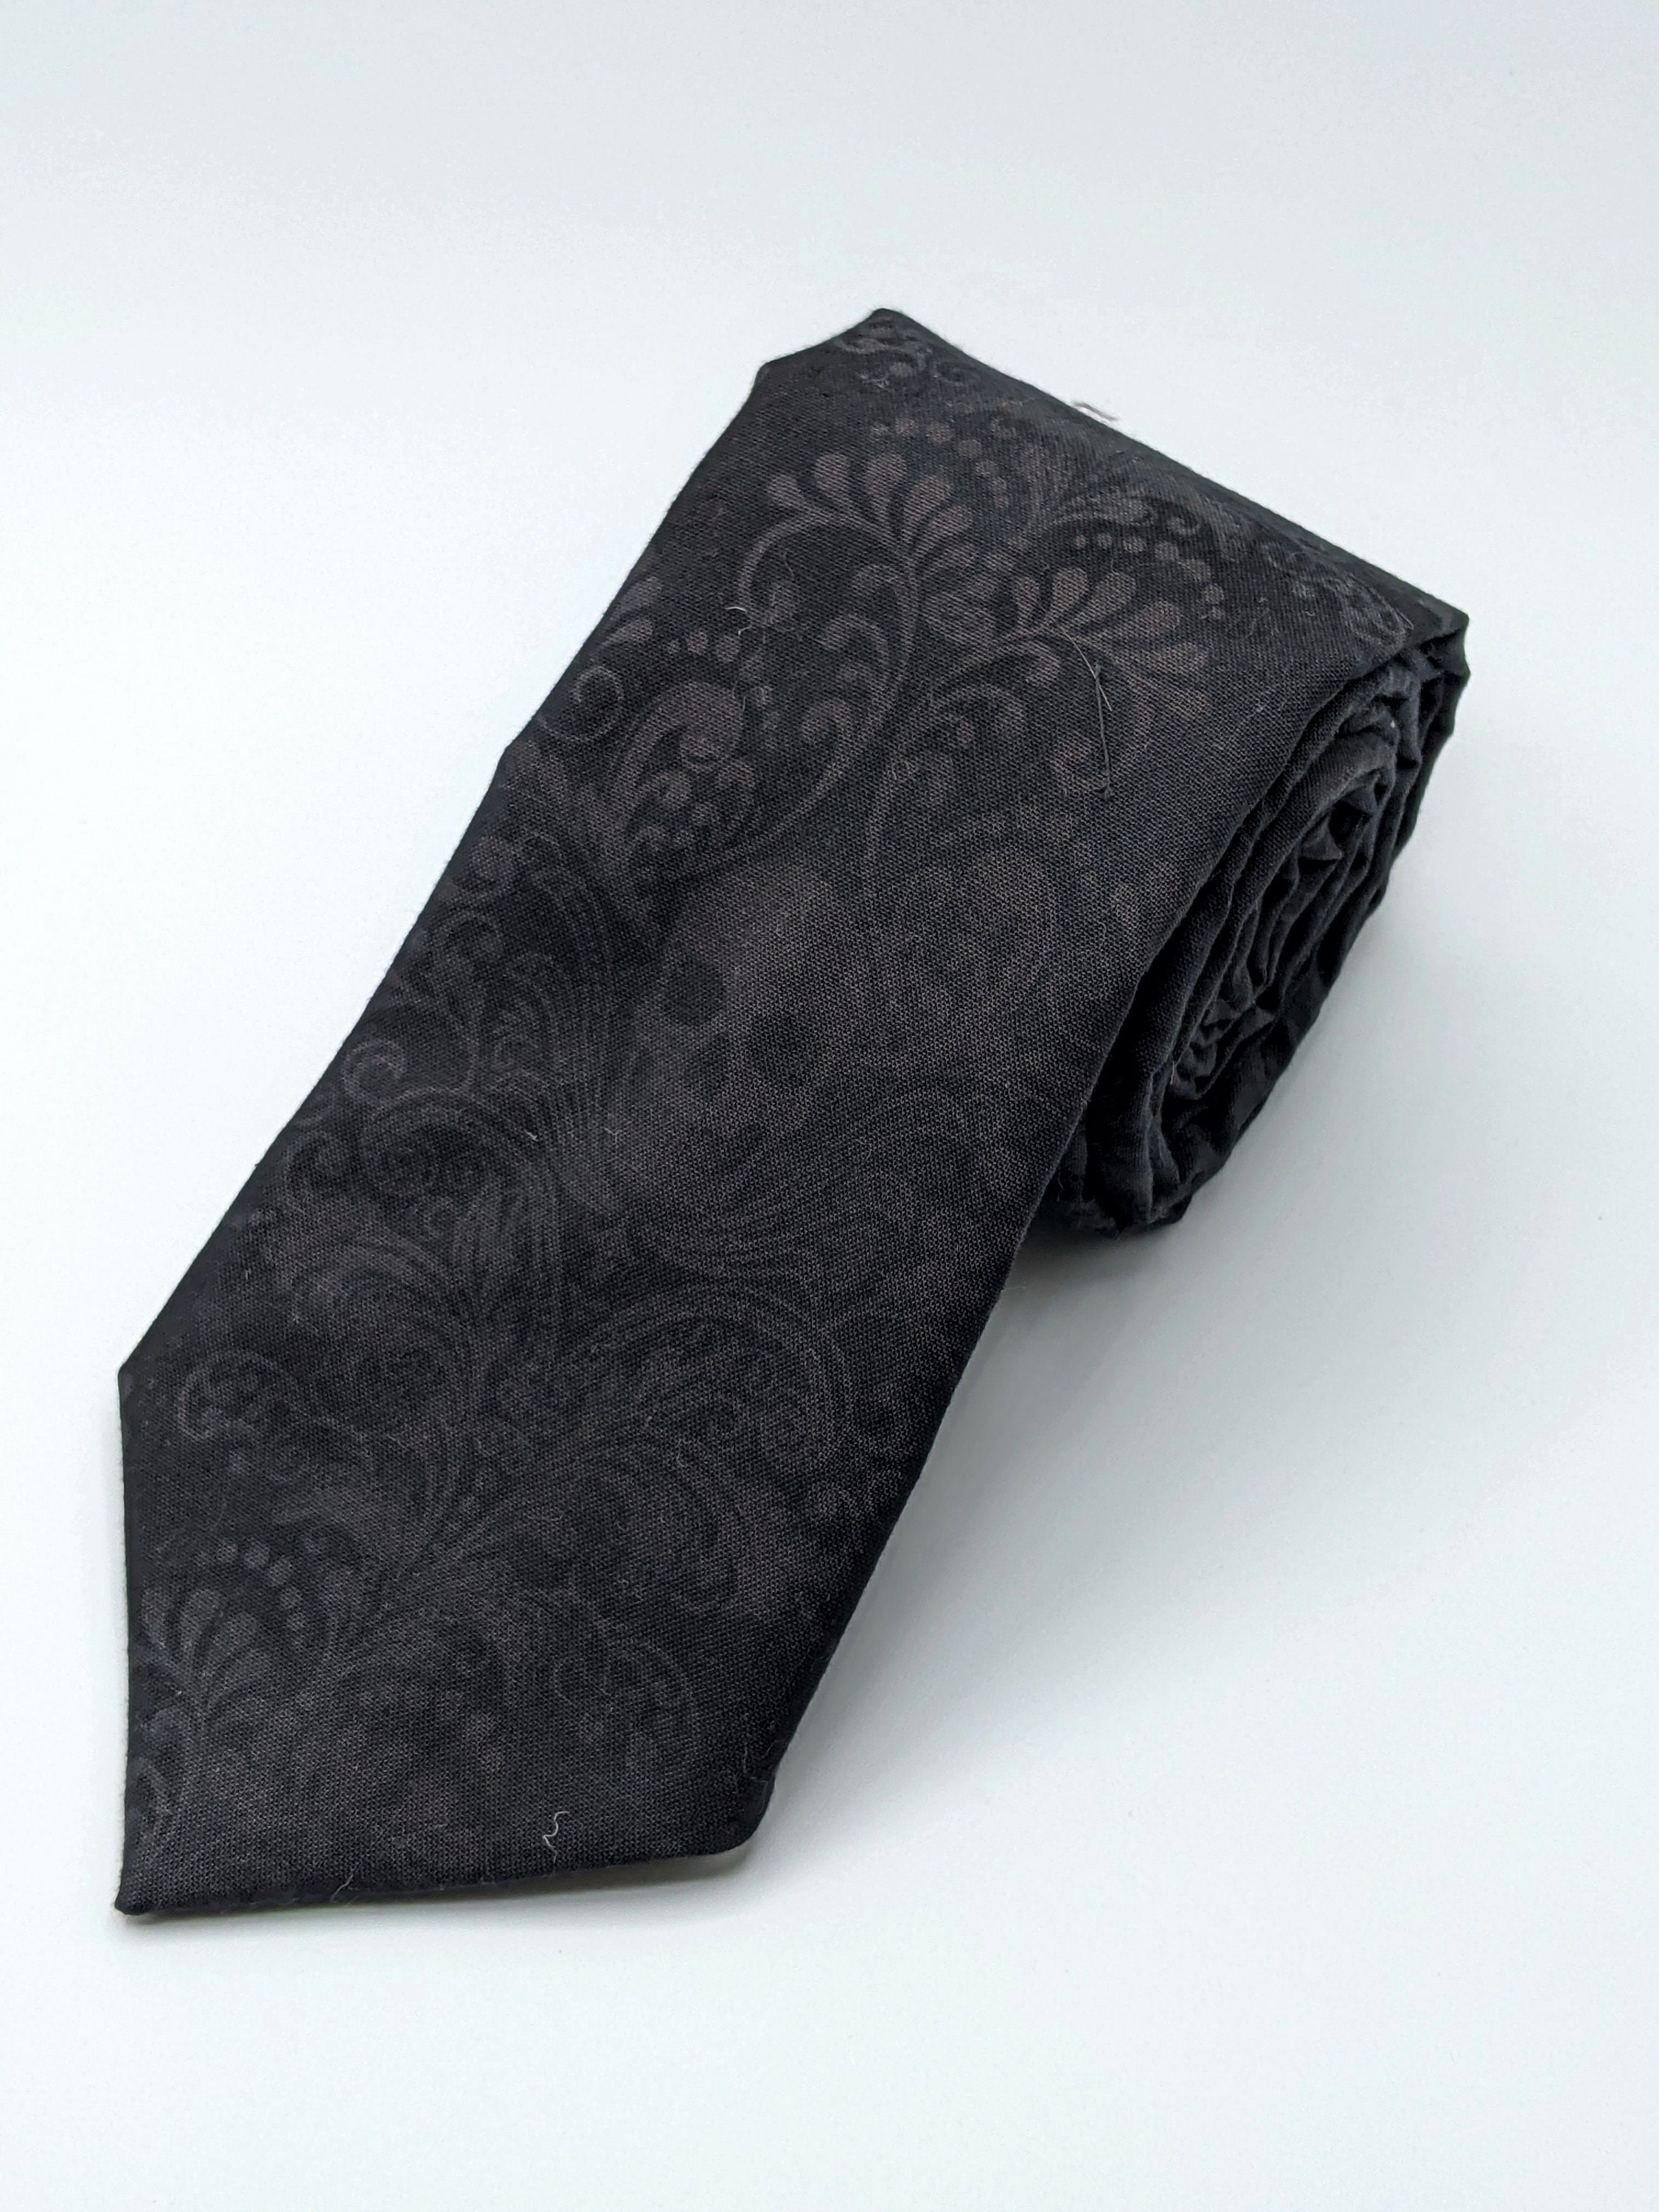 Charcoal and Grey Skull Tie - Etsy